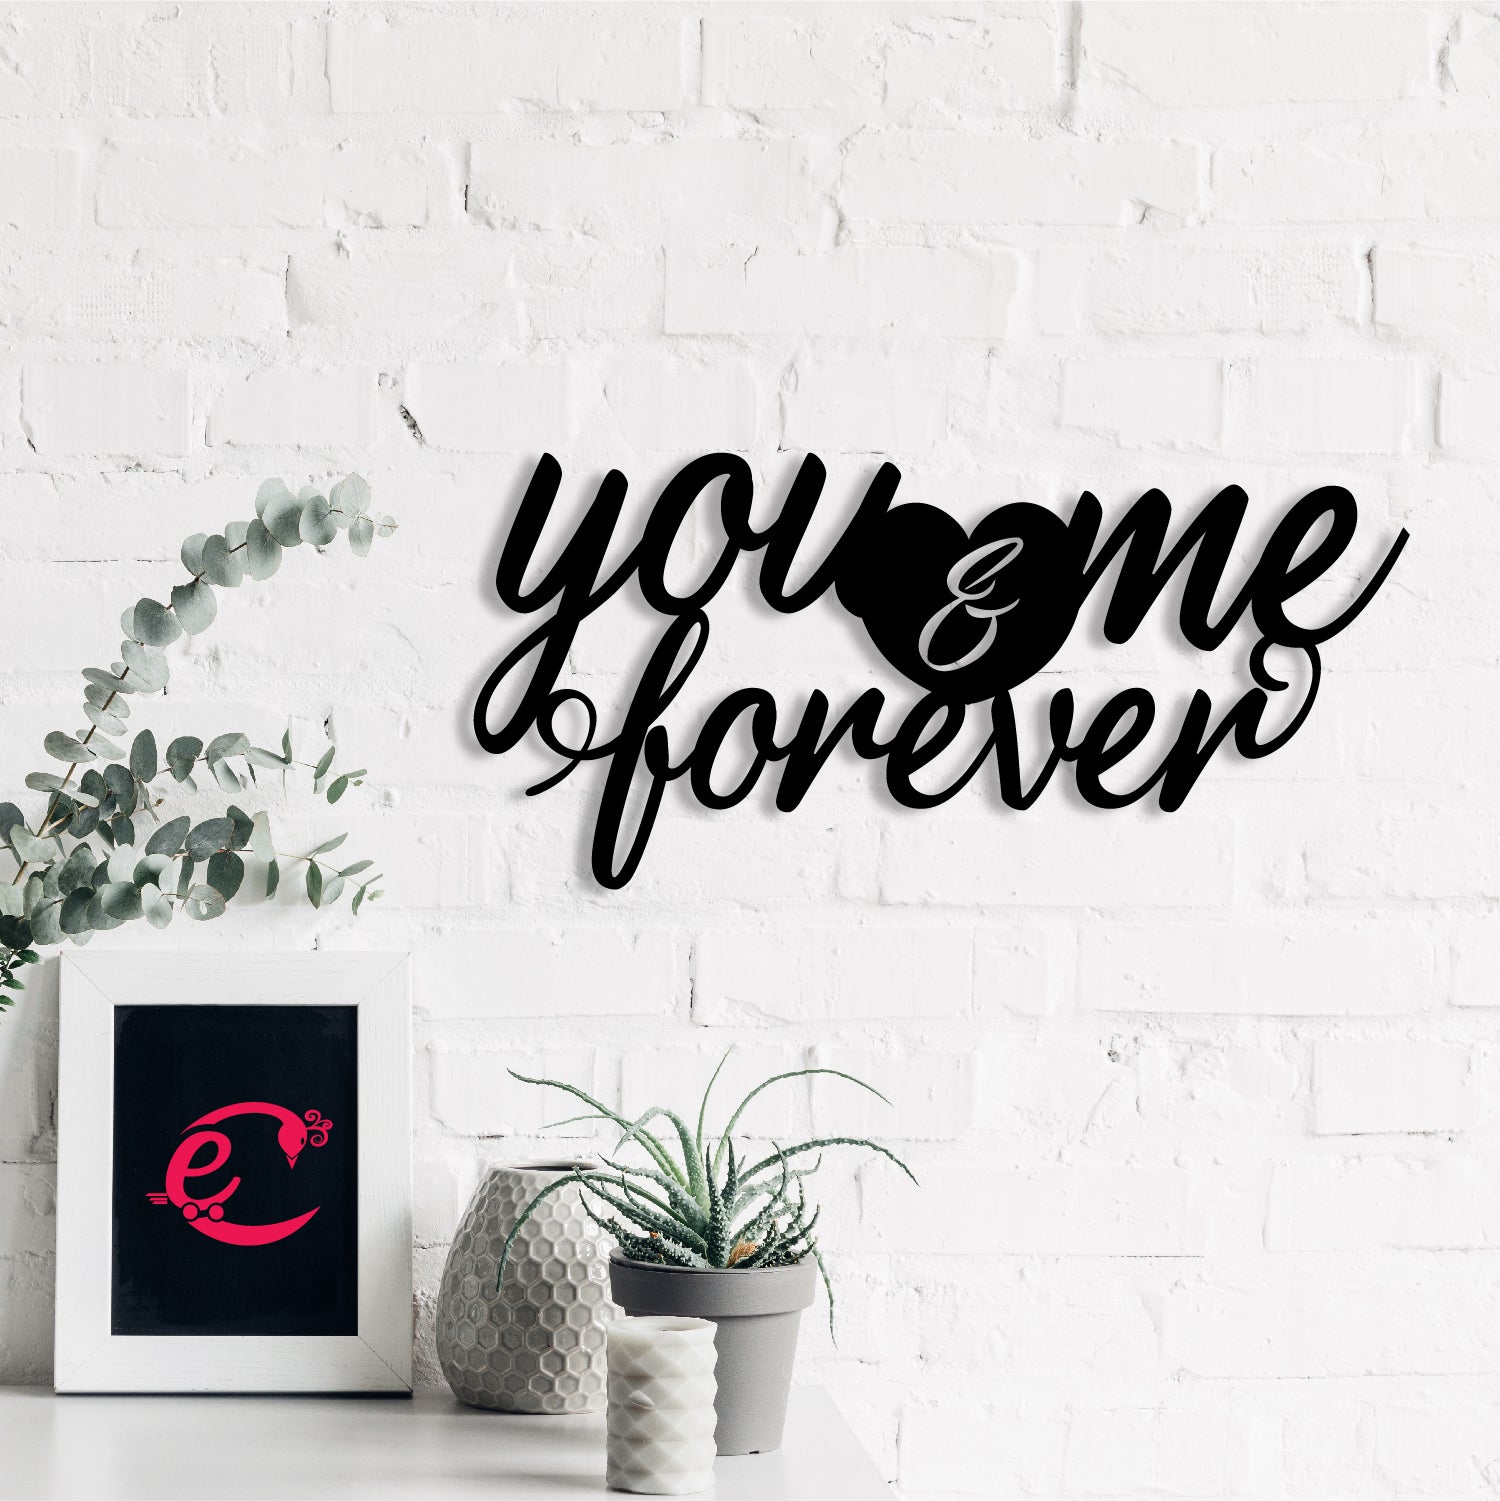 "You & Me Forever" Love Theme Black Engineered Wood Wall Art Cutout, Ready to Hang Home Decor